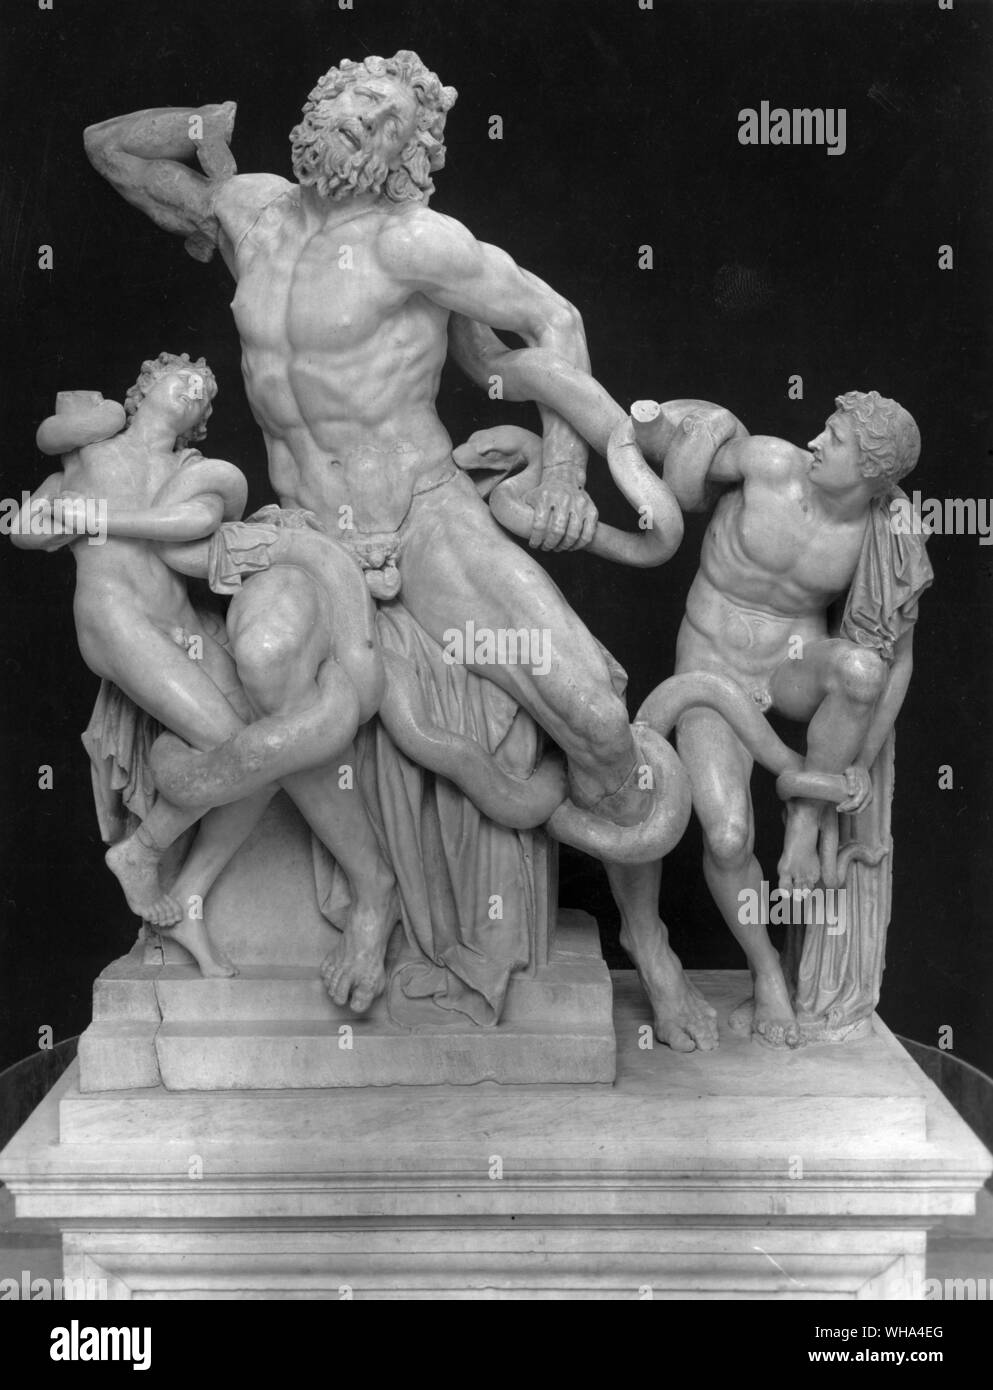 Hagesandros, Athenodoros and Polydoros of Rhodes. Laocoon and his sons. c. 175-150 BC. Marble, height 242 cm (95 1/2 in). Museo Pio Clementino, Vatican. In classical mythology, Laocoon was a priest in Troy during the Trojan War. When the Trojans discovered the Trojan horse outside their gates, Laocoon warned against bringing it into the city, remarking, ÒI am wary of Greeks even when they are bringing gifts.Ó (See ÒBeware of Greeks bearing gifts.Ó) The god Poseidon, who favored the Greeks, then sent two enormous snakes after Laocoon. The creatures coiled themselves around the priest and his Stock Photo